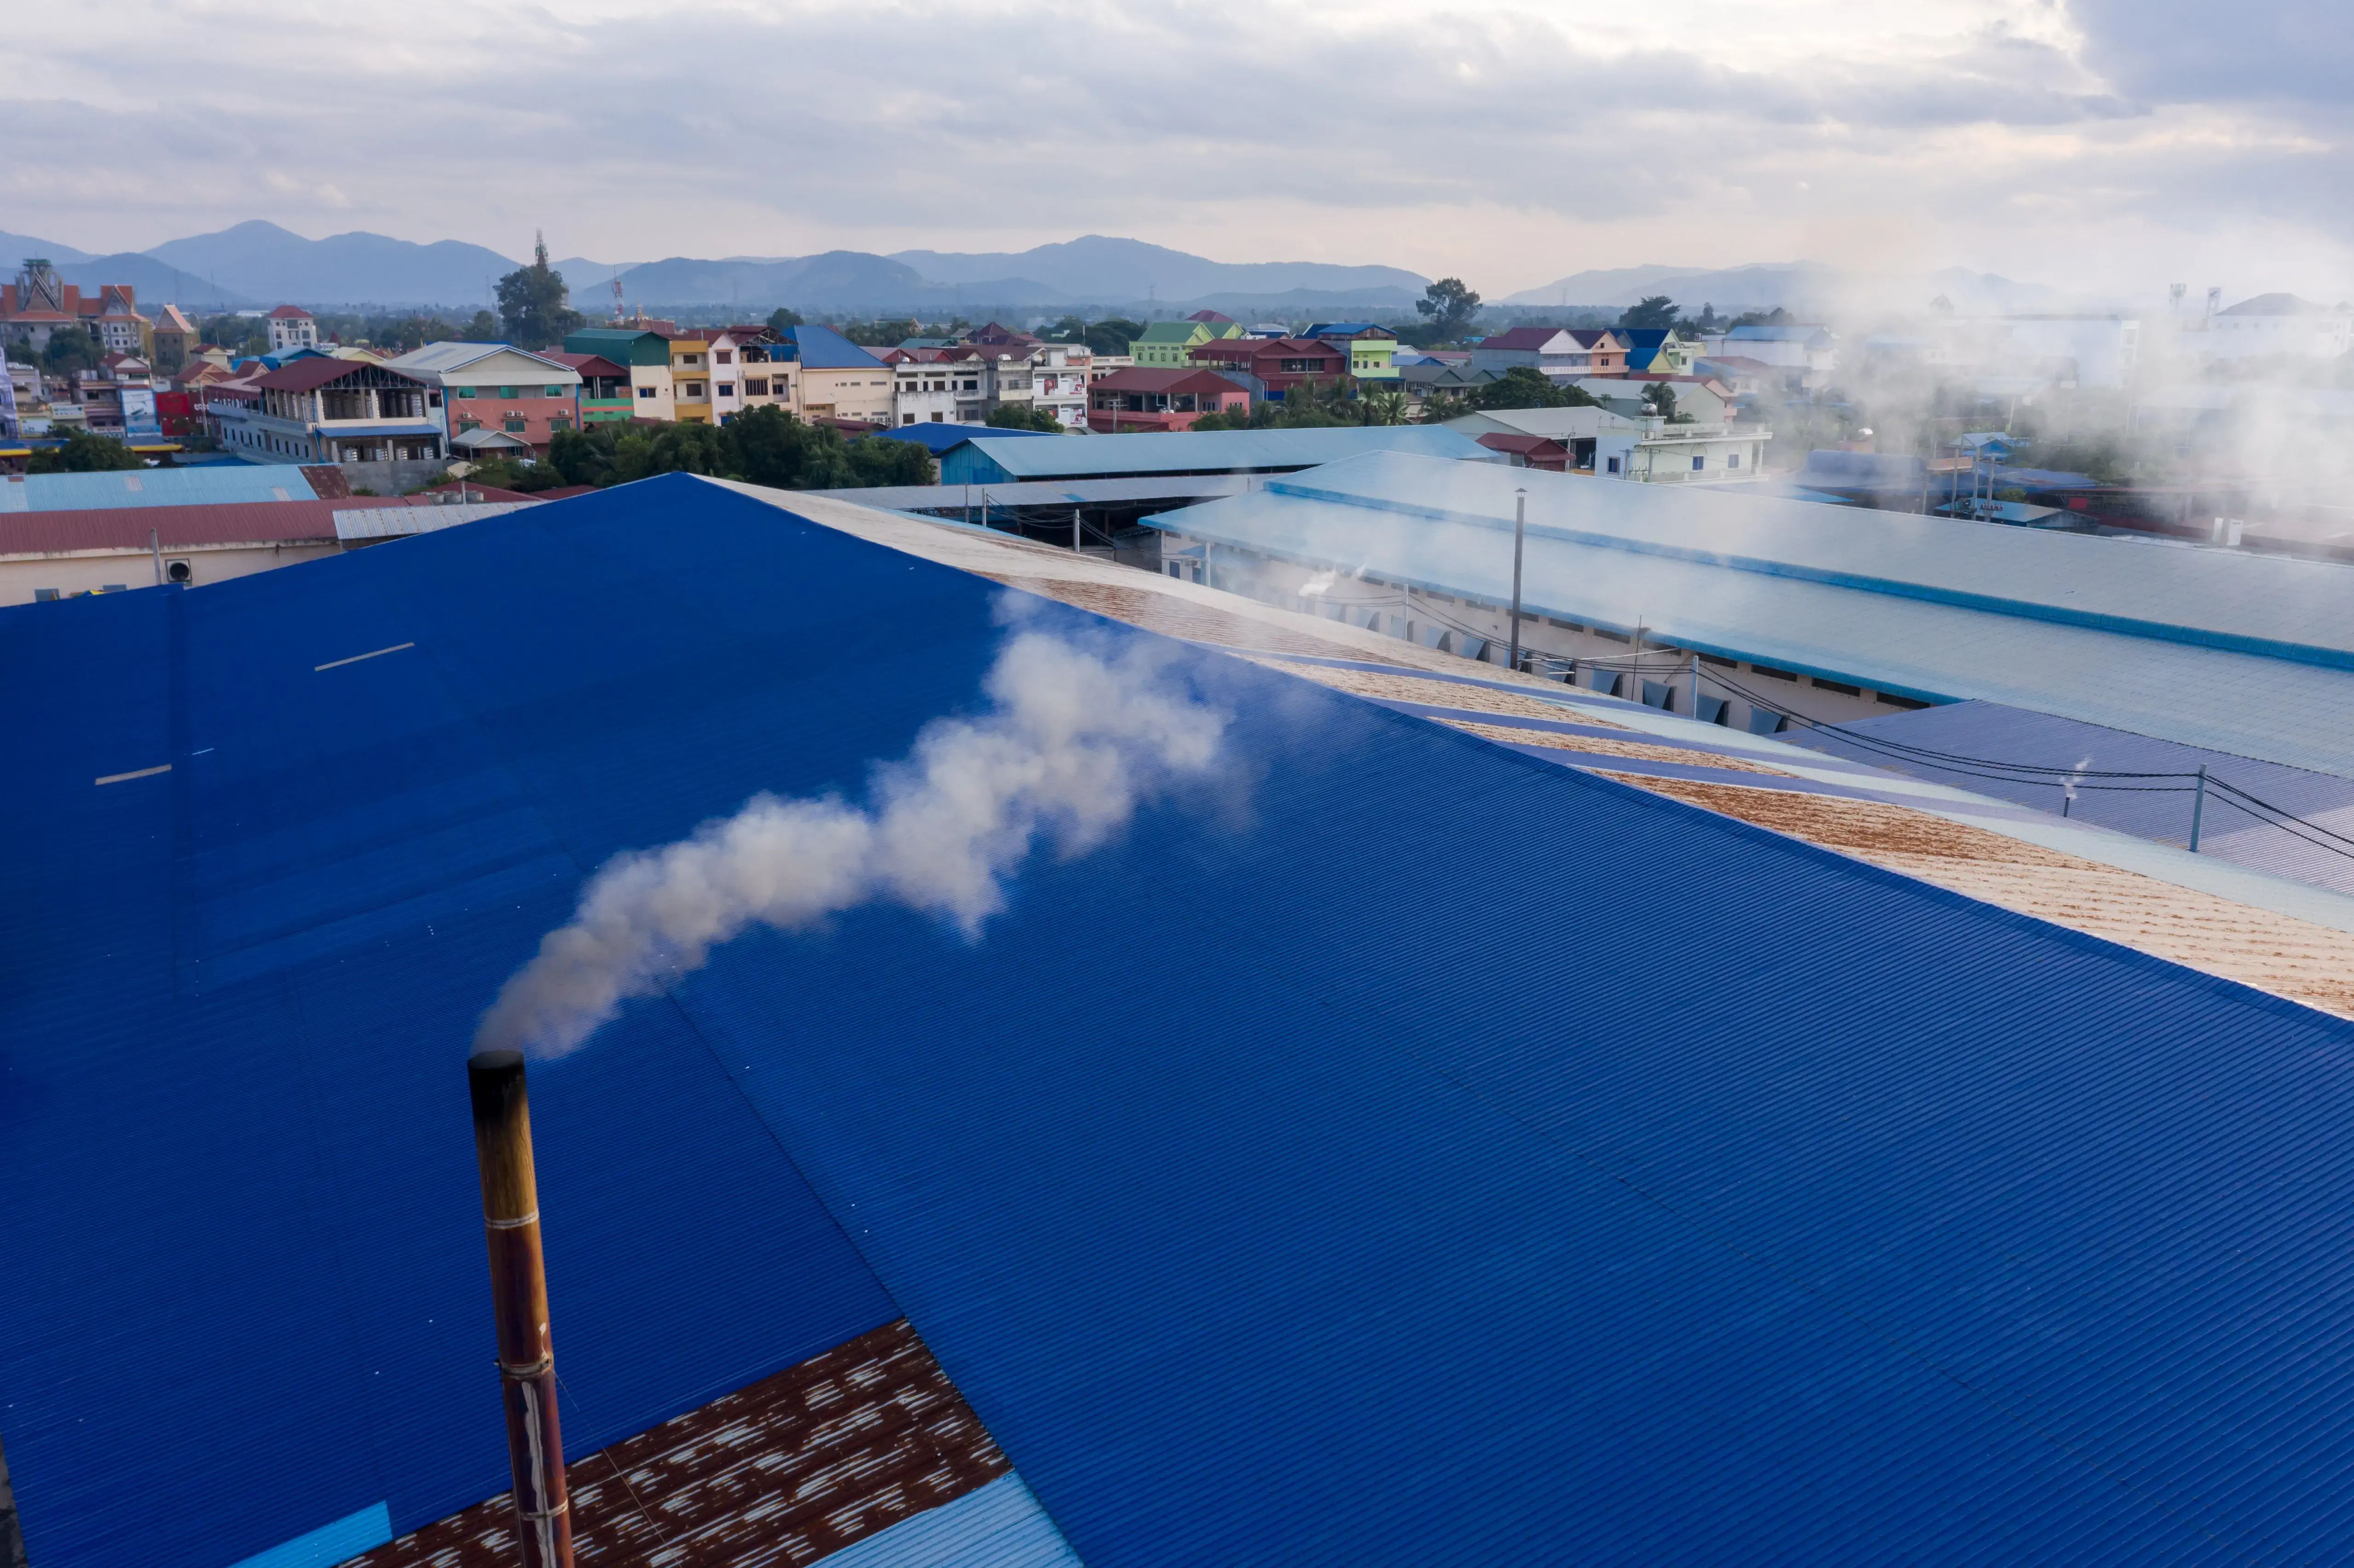 Smoke billows from an incinerator at the Sheng Huang Industries Co., Ltd garment factory in Kampong Speu province. Credit: Andy Ball/Mongabay.